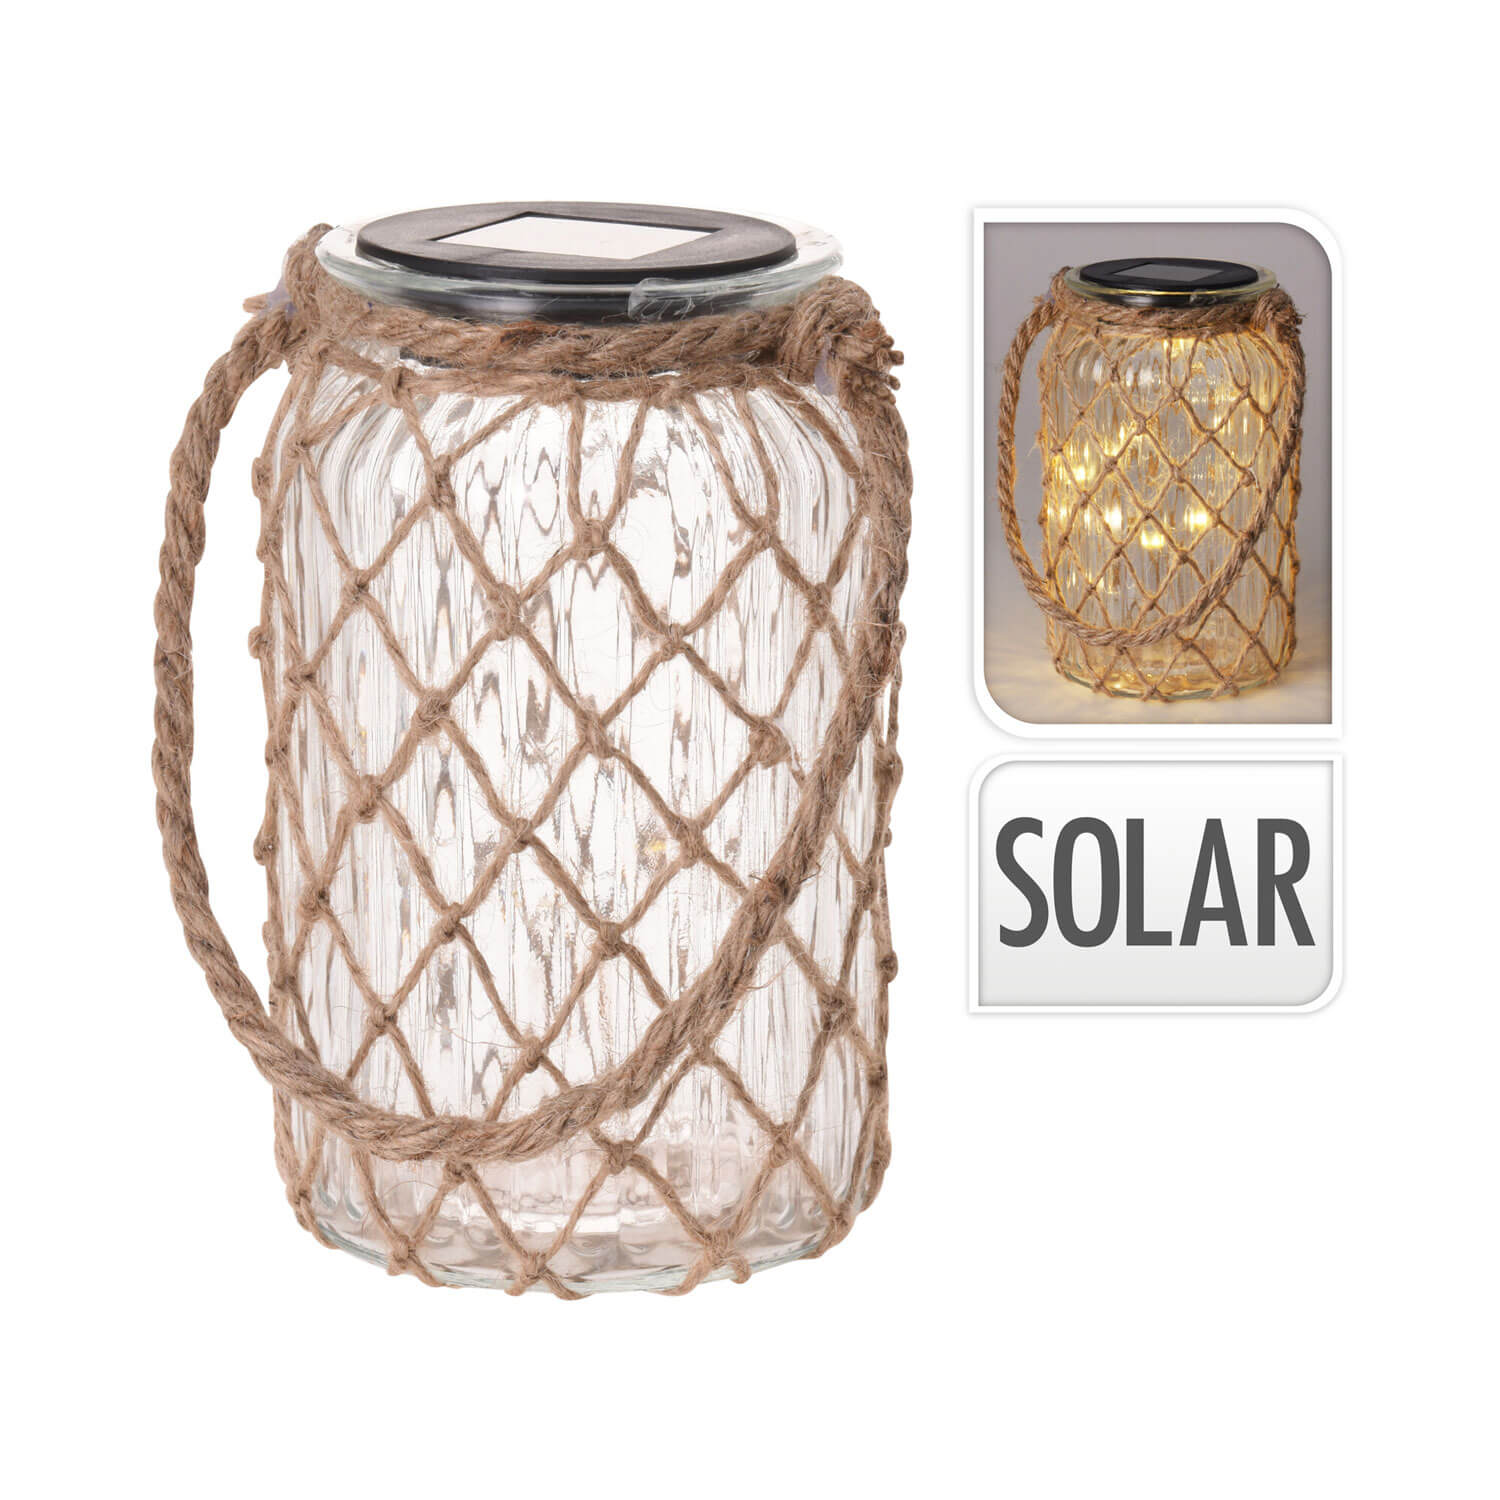 The Home Garden Solar Glass Lamp 1 Shaws Department Stores